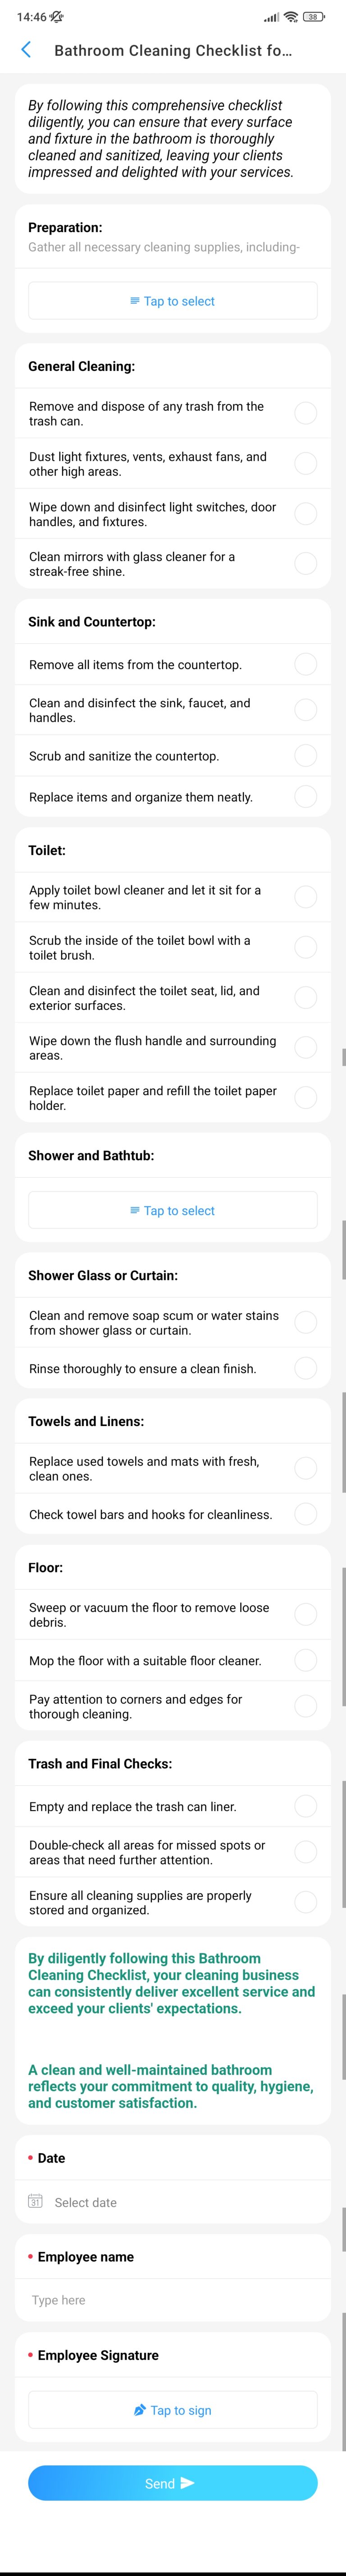 Bathroom Cleaning Checklist for Cleaning Businesses screenshot